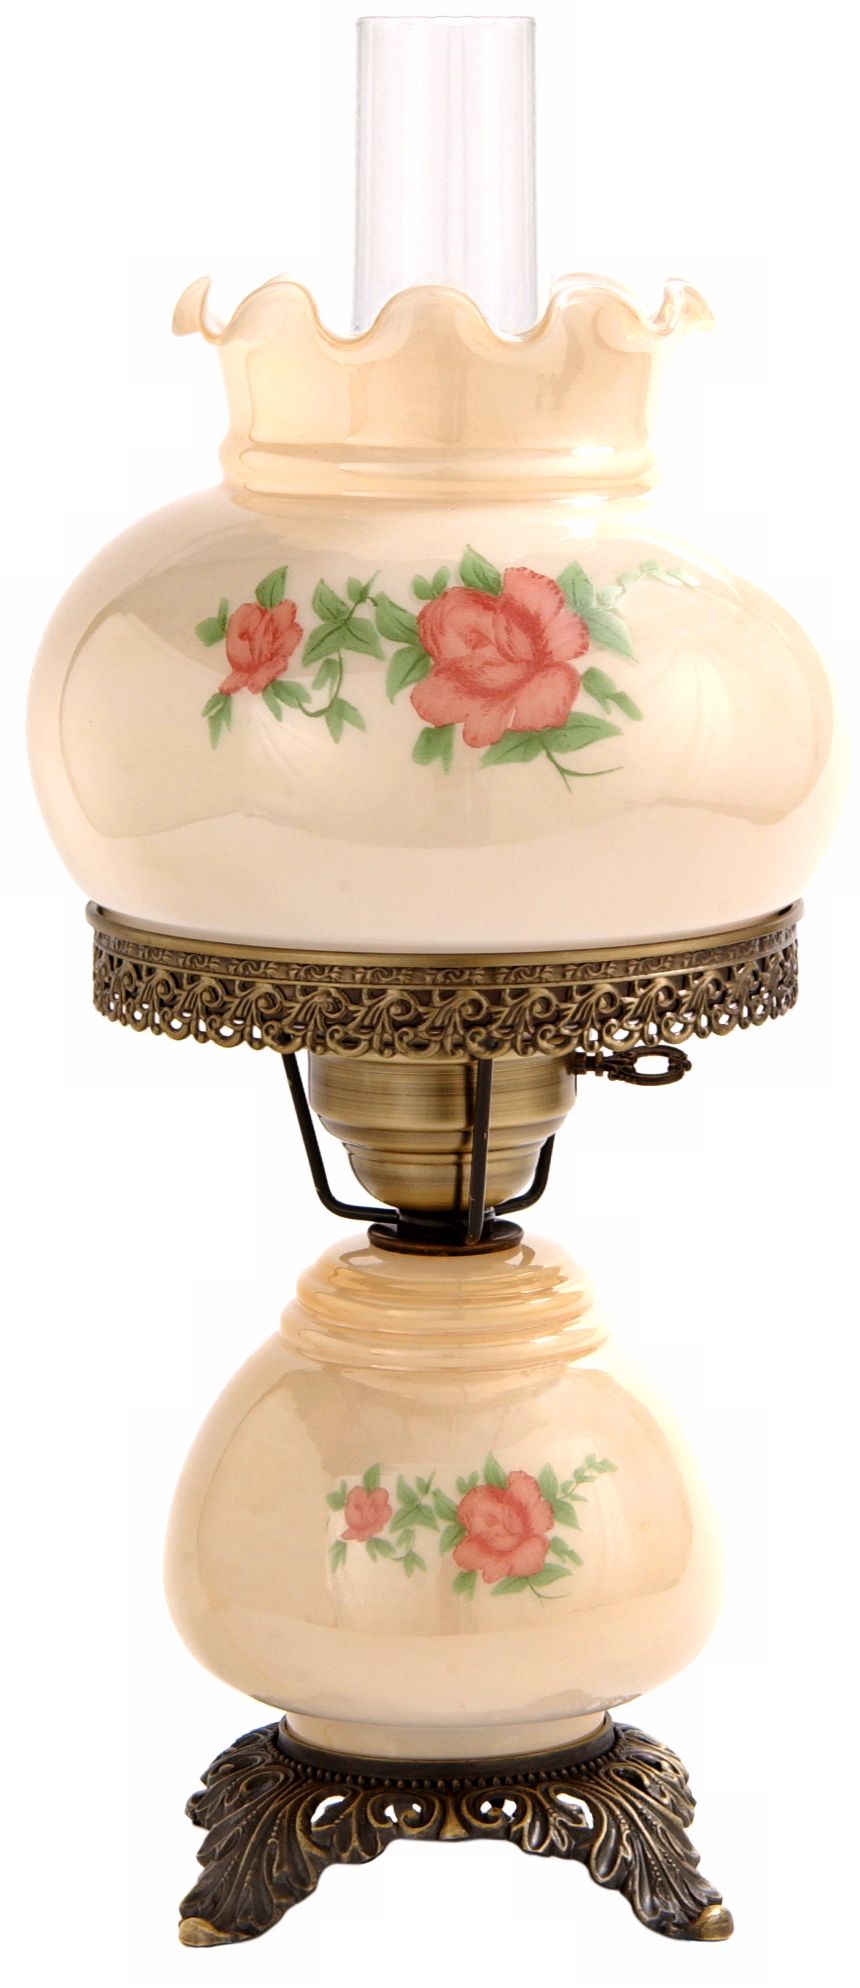 hurricane lamps small red rose 18 LASMMKM